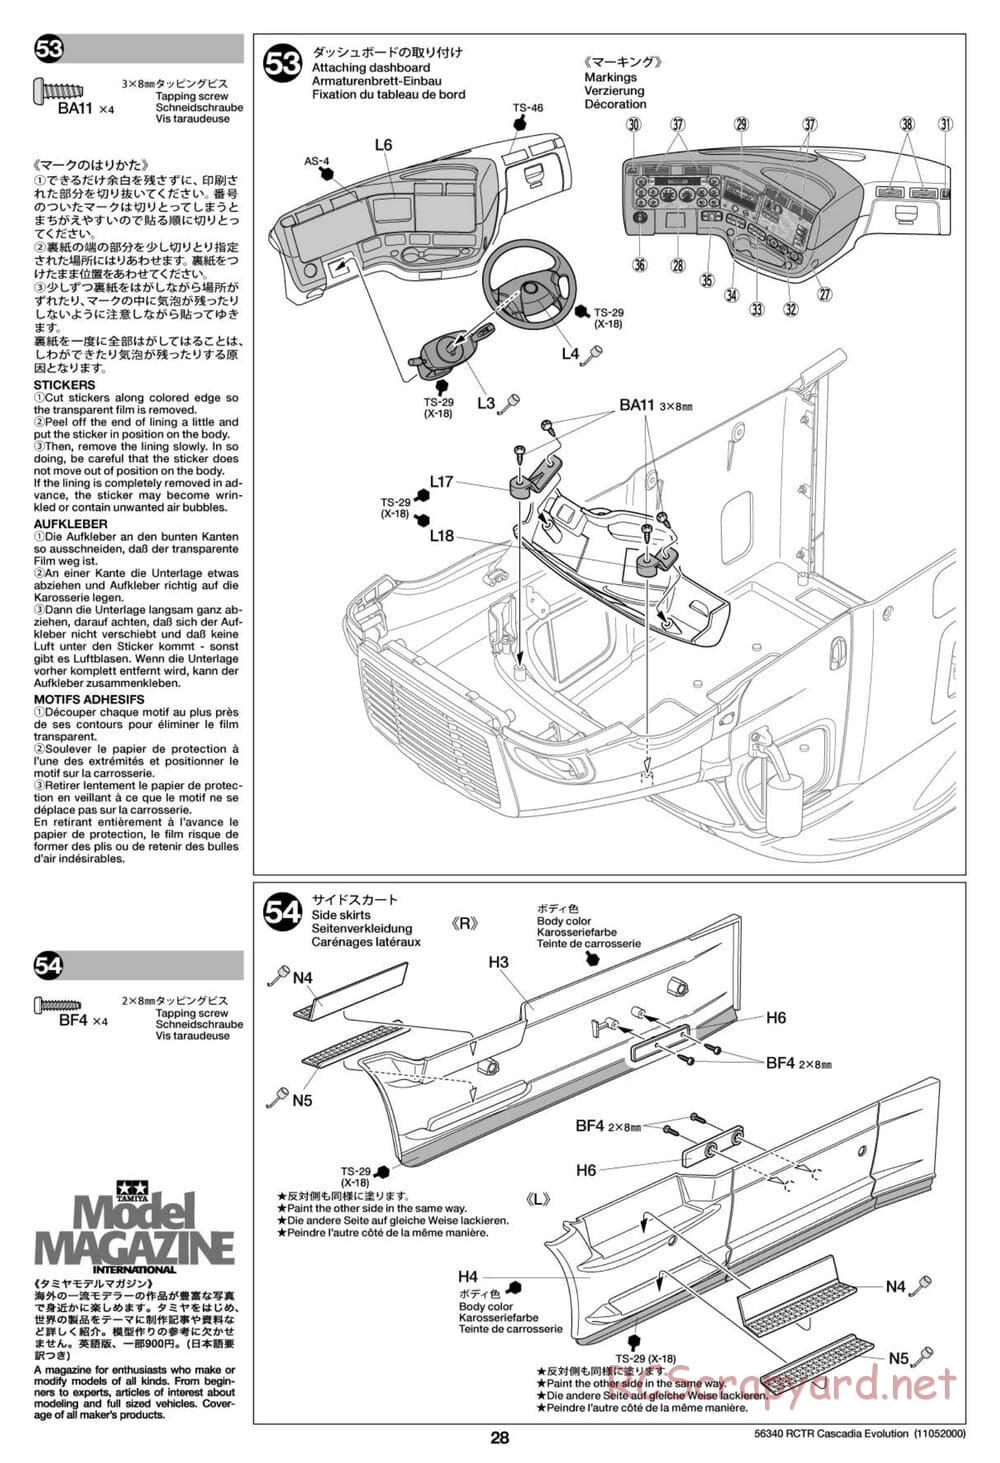 Tamiya - Freightliner Cascadia Evolution Tractor Truck Chassis - Manual - Page 28